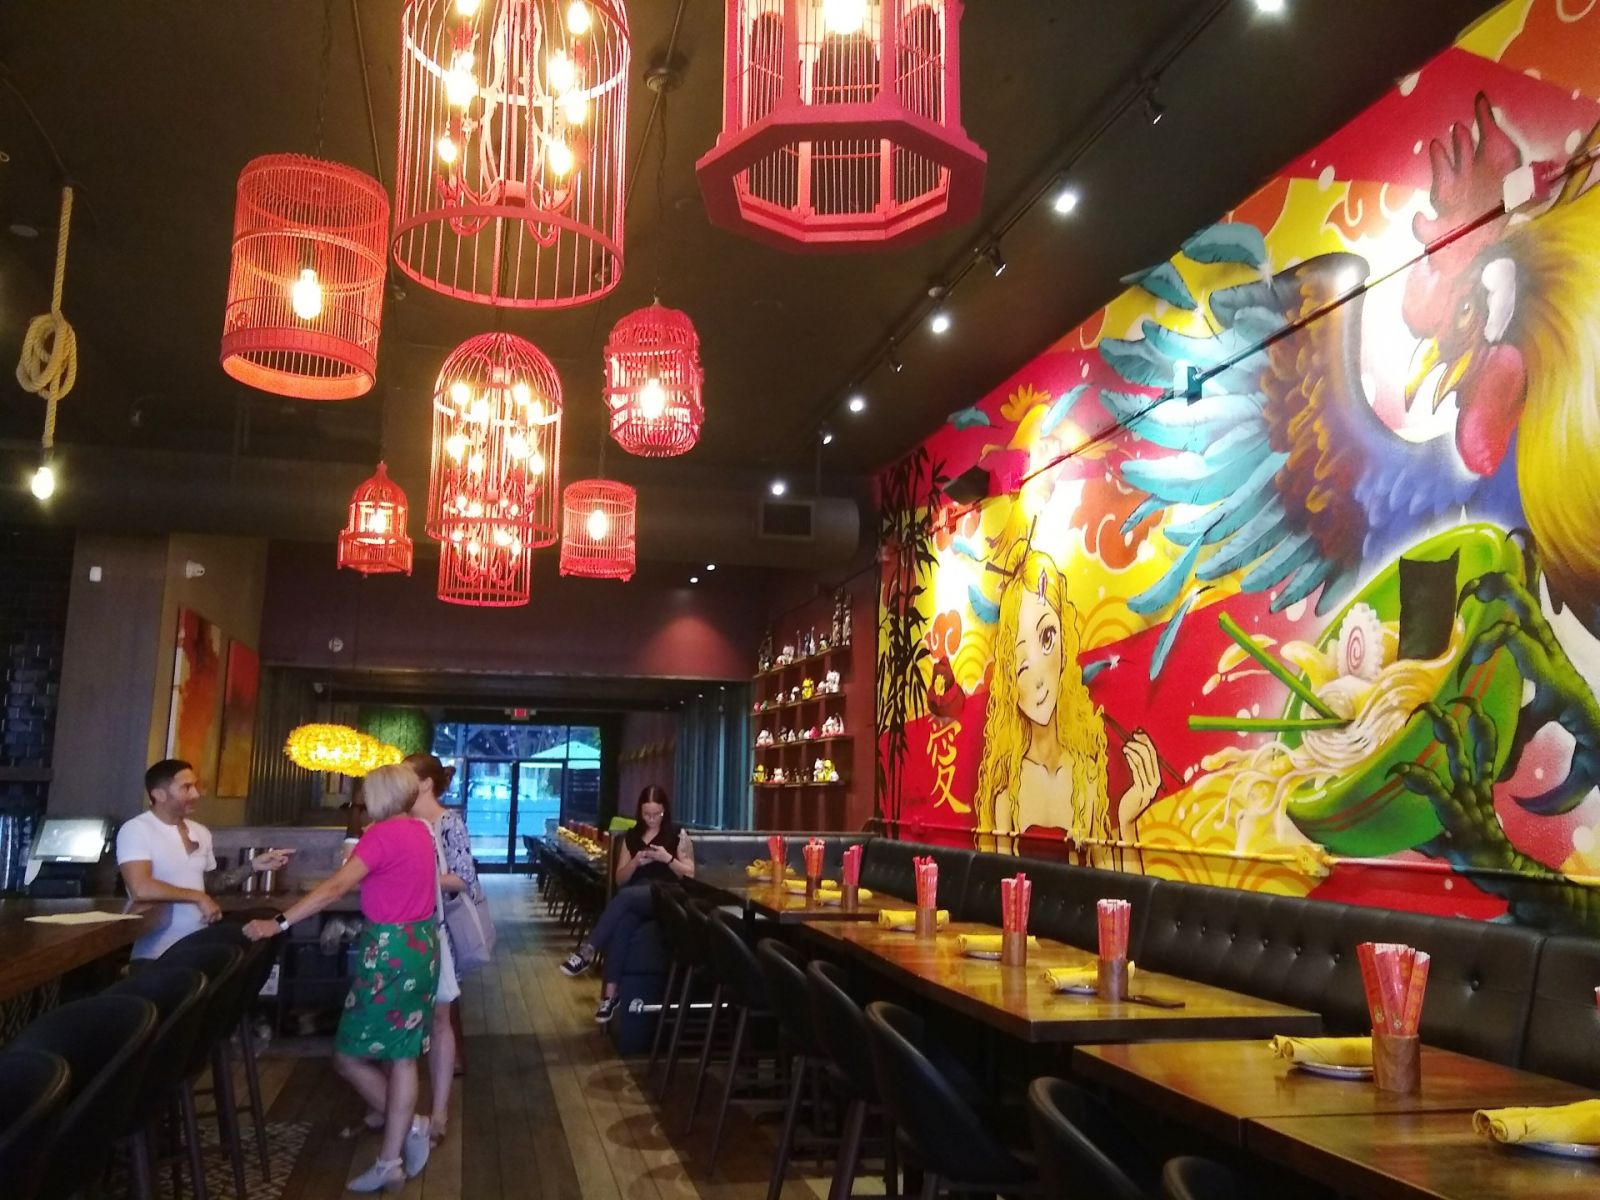 Boku Kitchen and Saloon brings an Asian-themed, upscale atmosphere to the Congaree Vista. (Photo/Christina Lee Knauss)